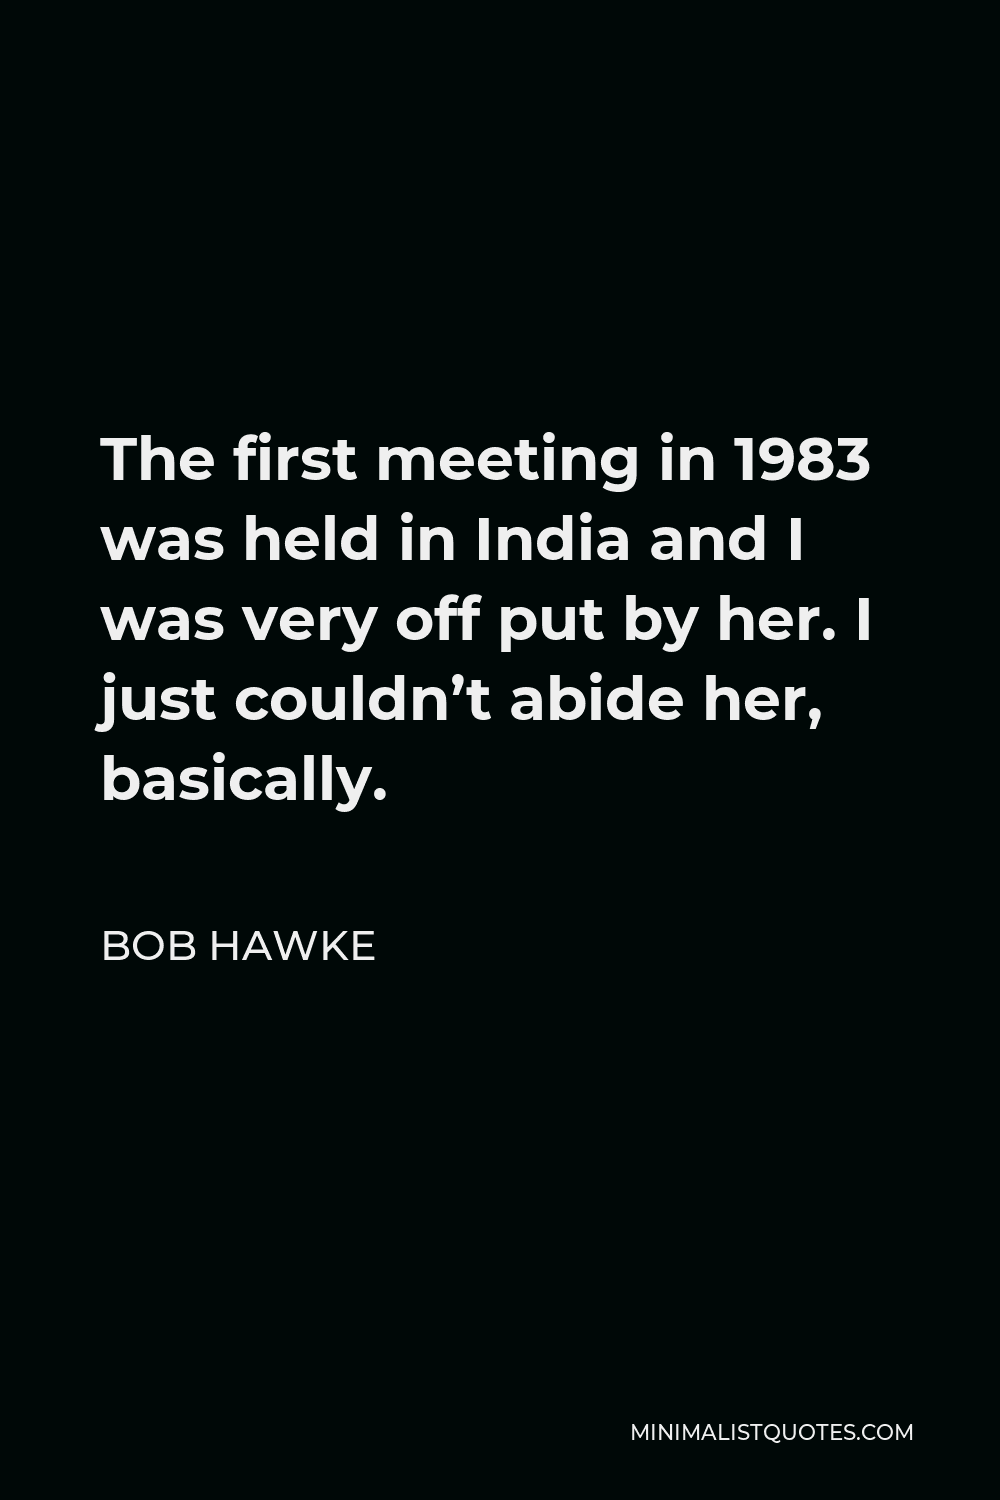 Bob Hawke Quote - The first meeting in 1983 was held in India and I was very off put by her. I just couldn’t abide her, basically.